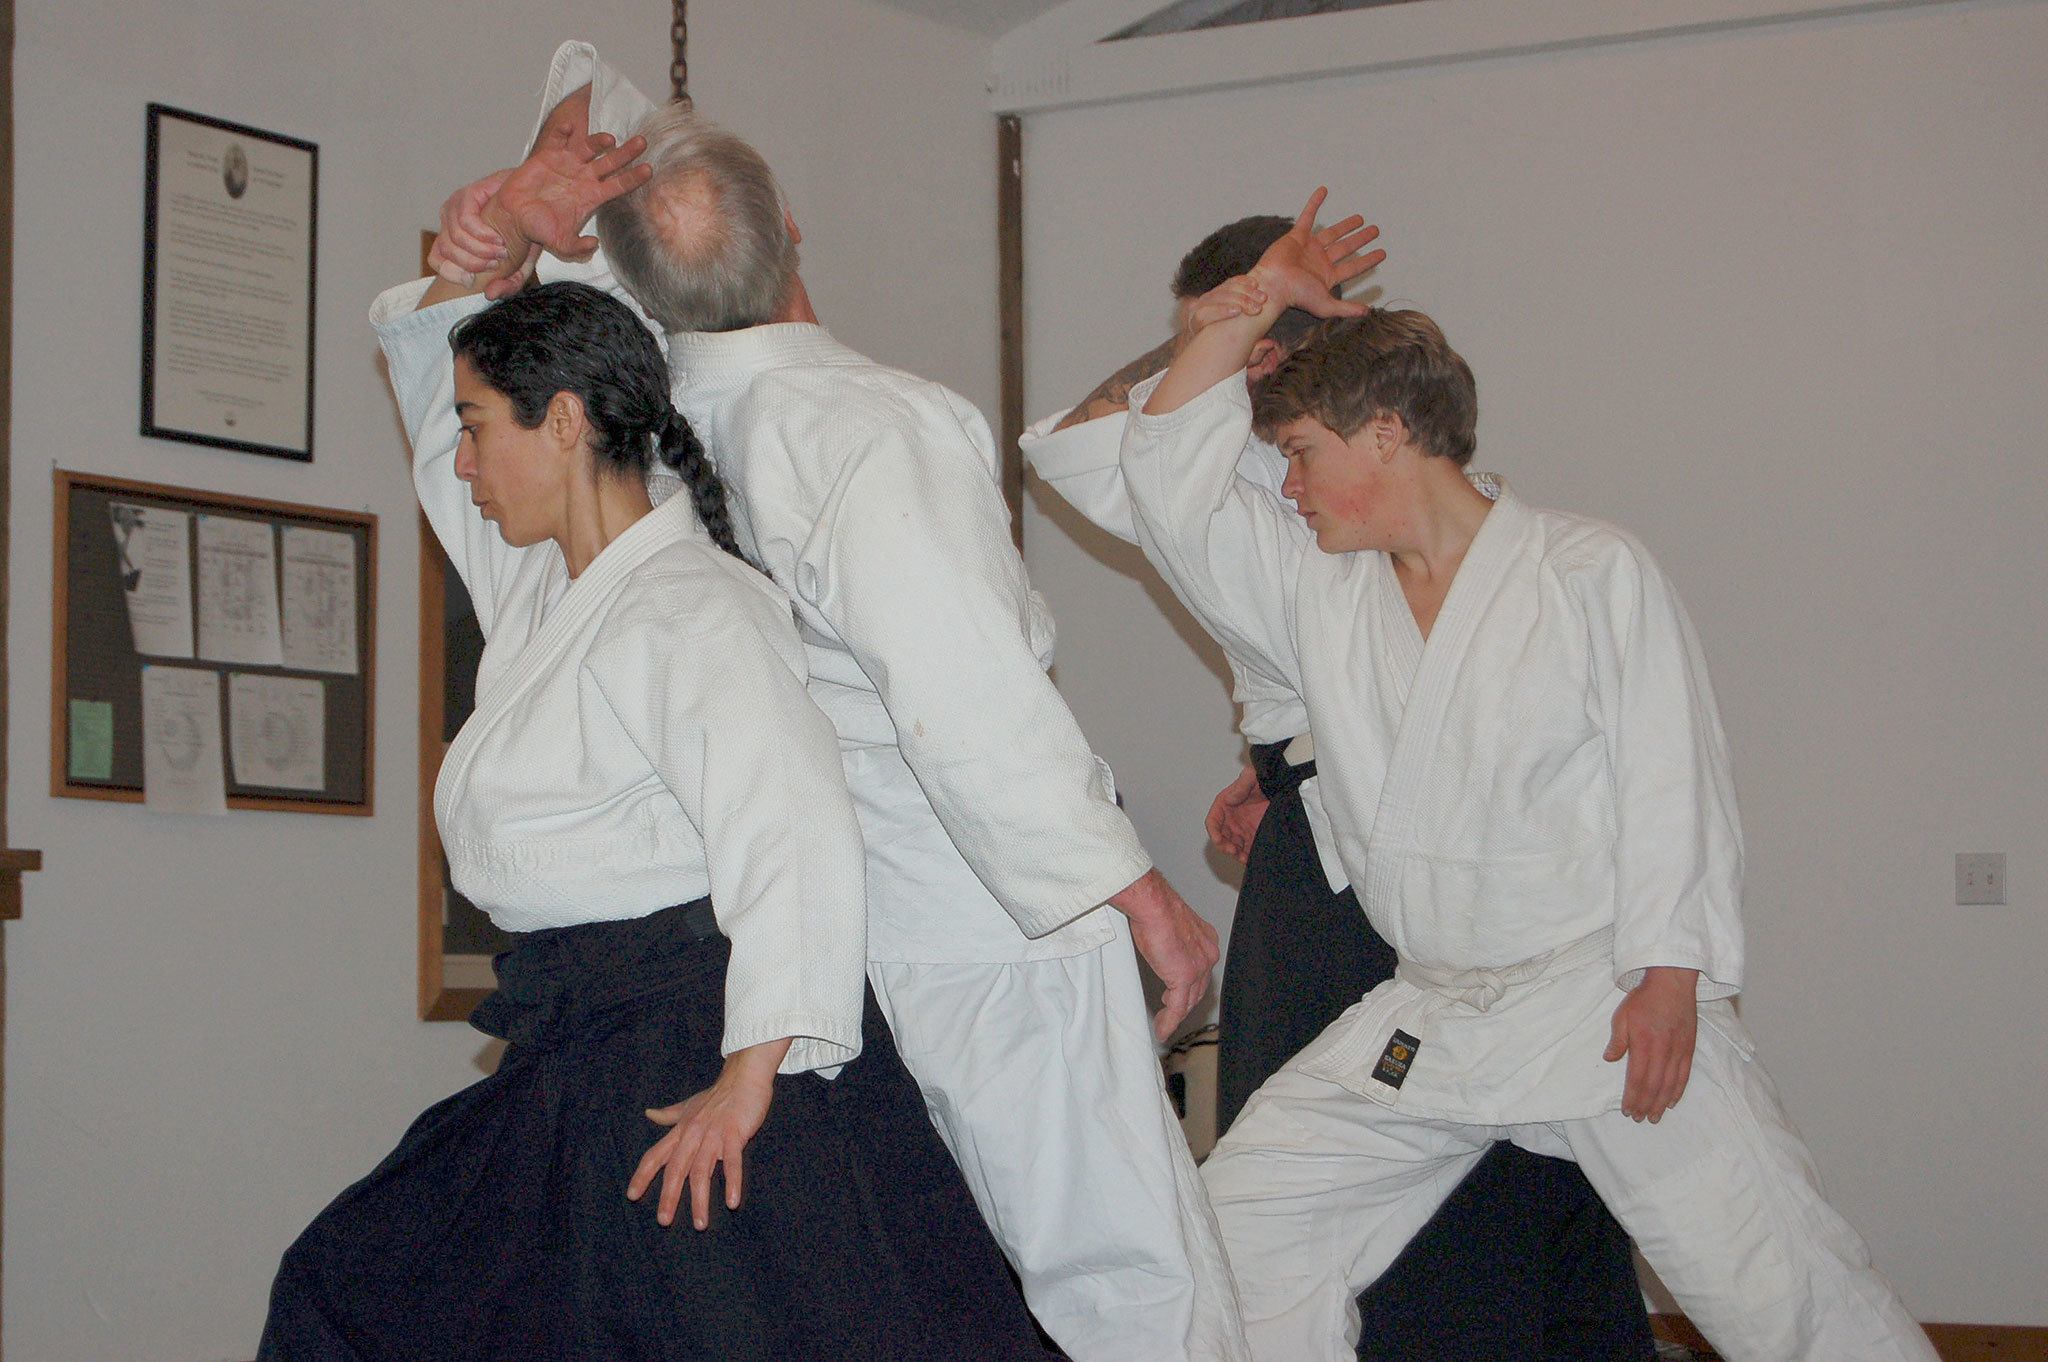 The martial way of Aikido